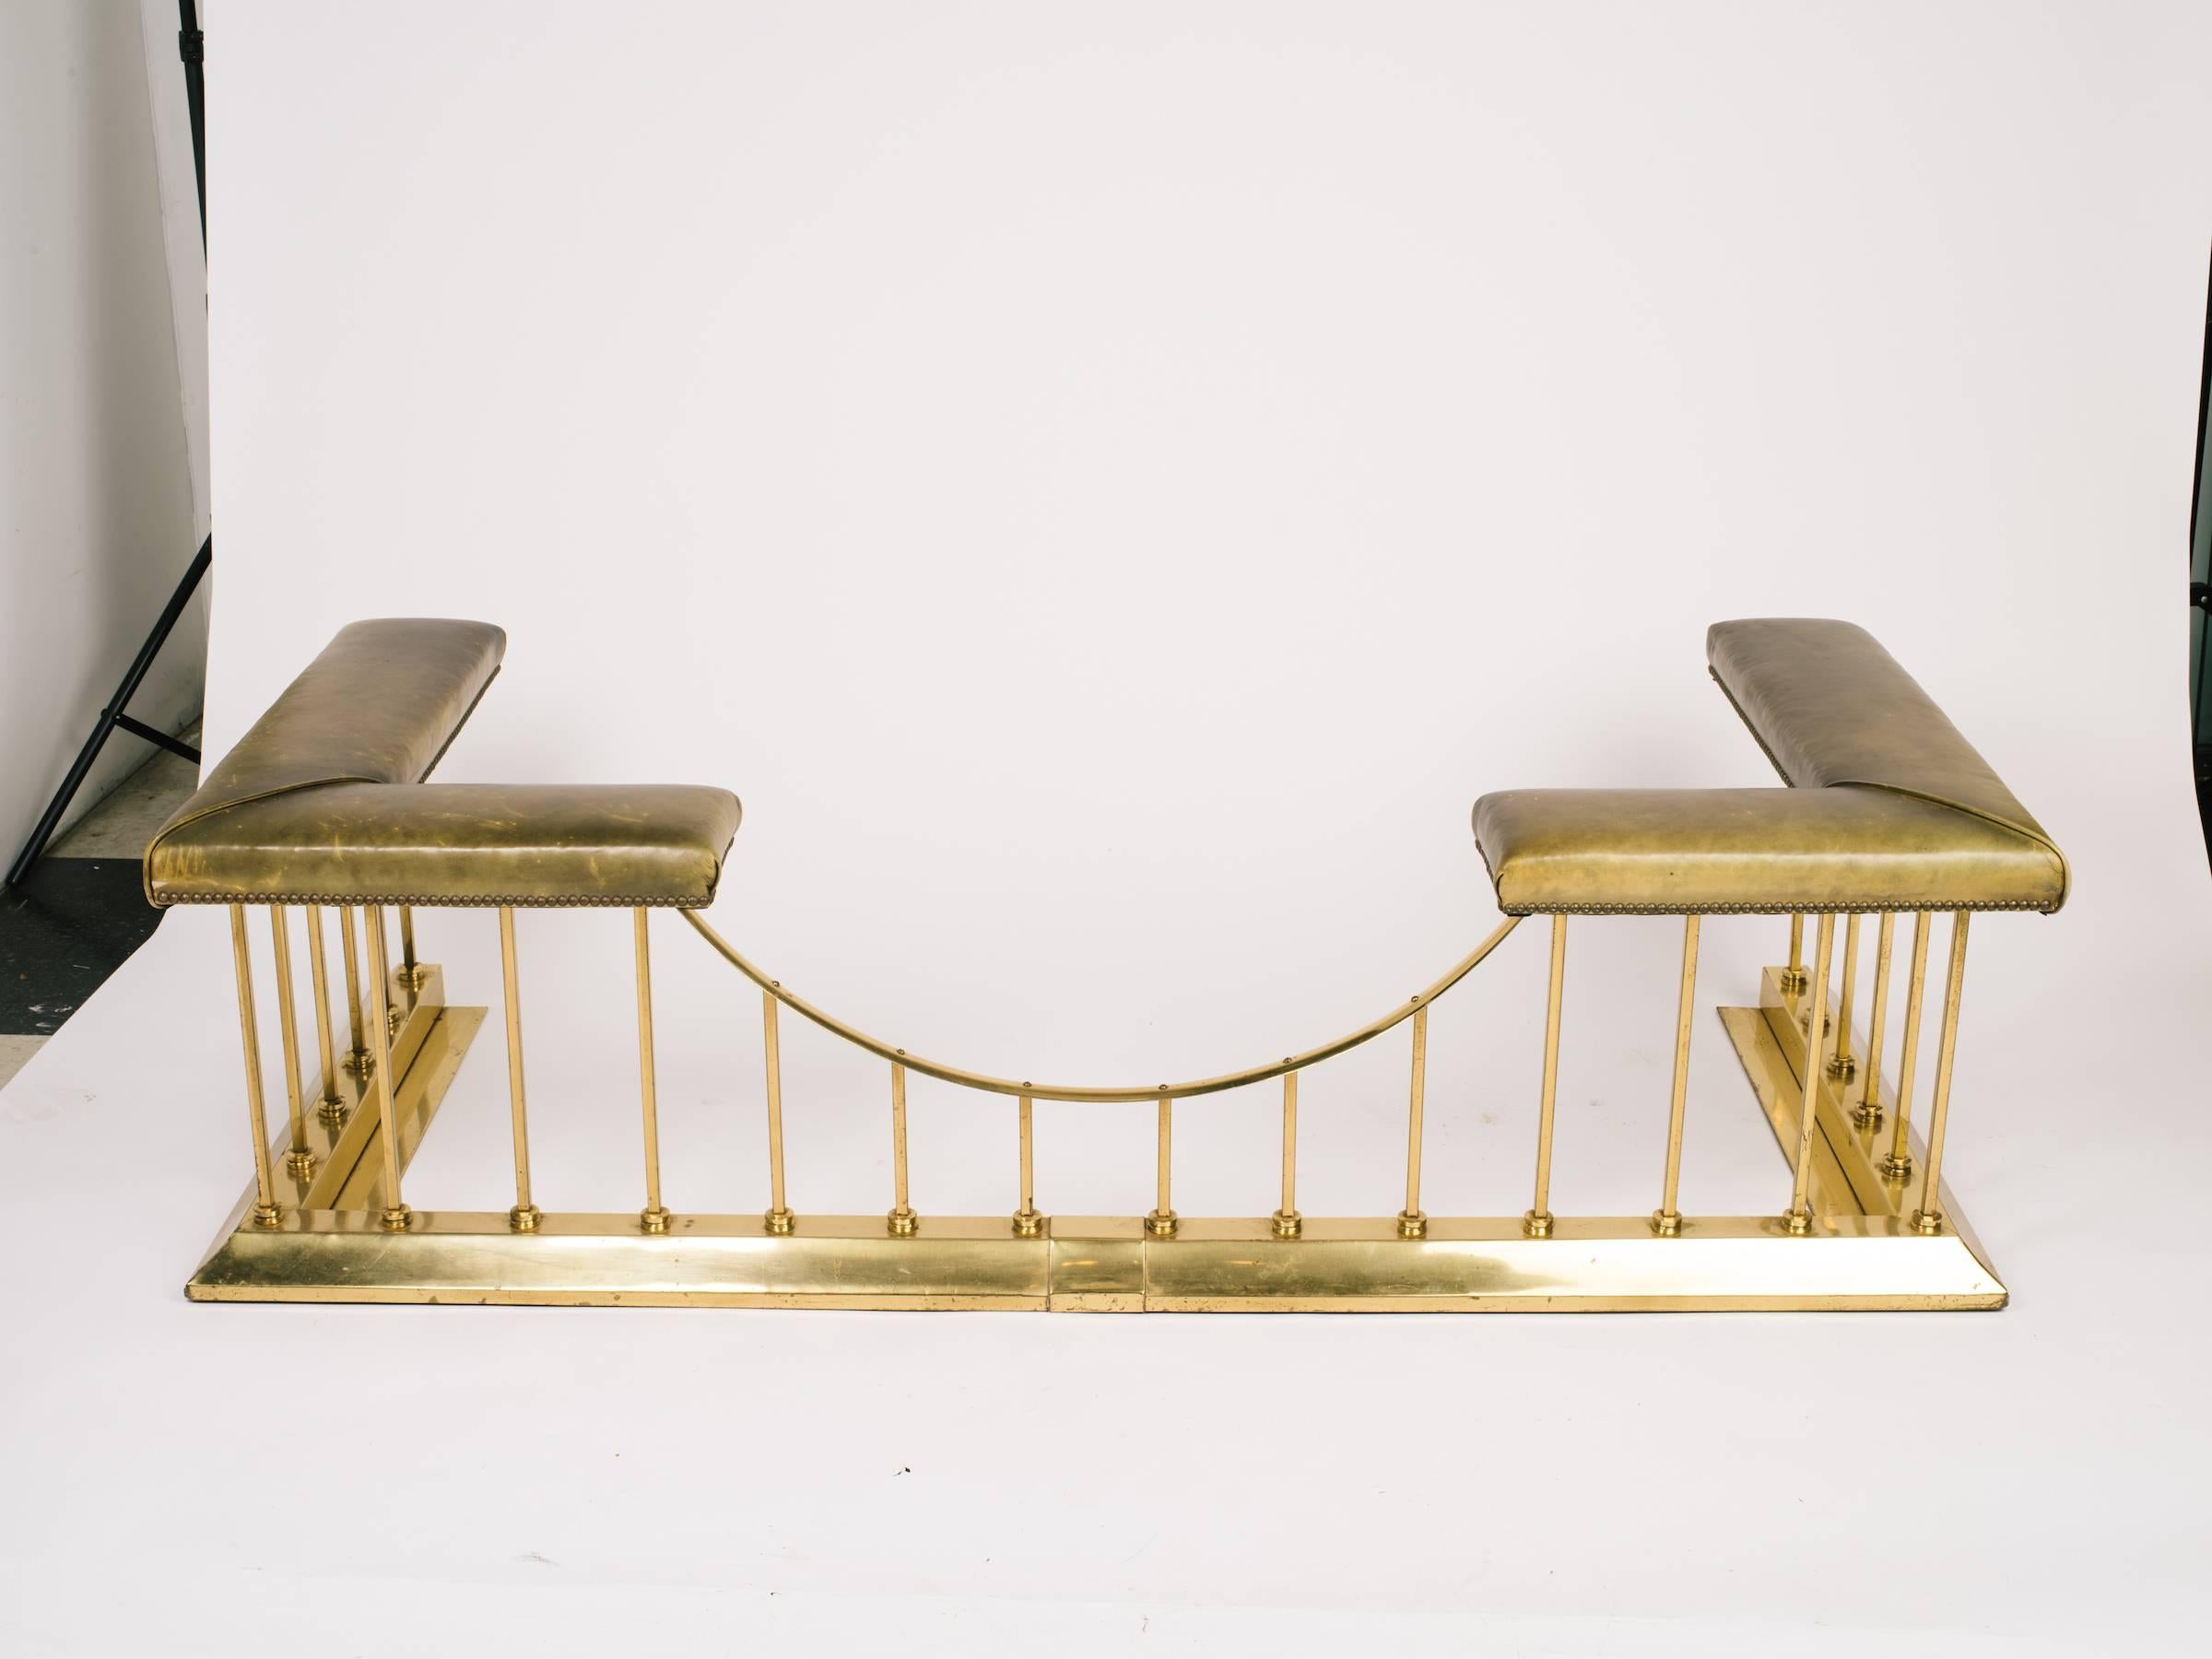 Late 19th Century 1880s English Brass and Leather Fire Place Fender Bench